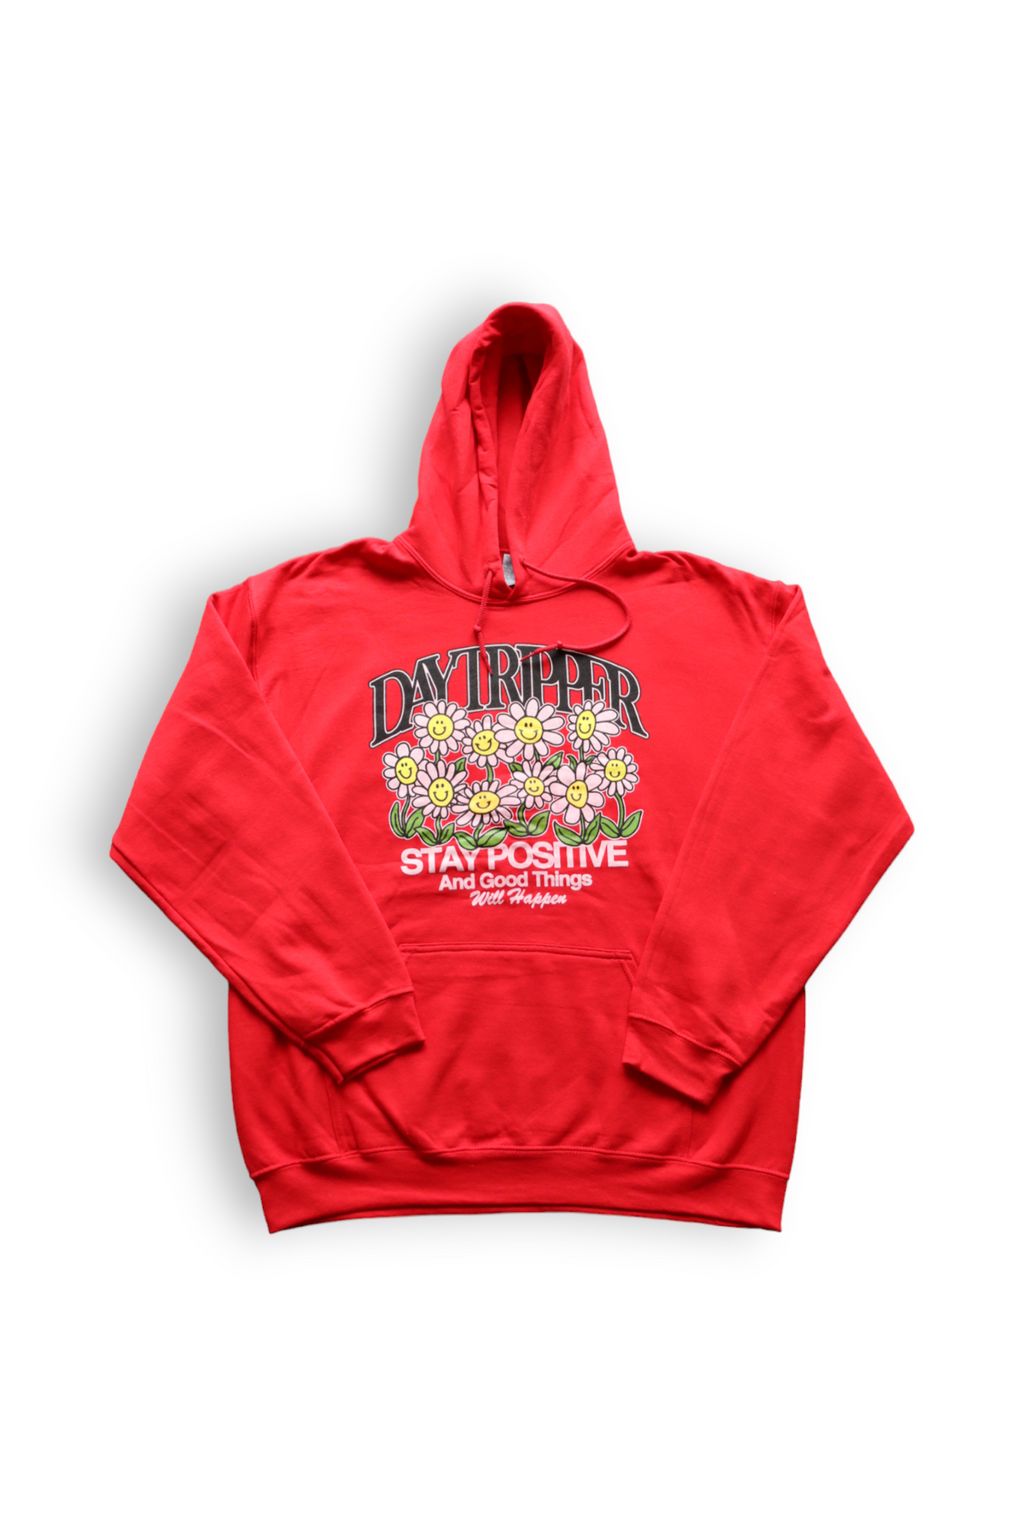 STAY POSITIVE HOODIE - RED